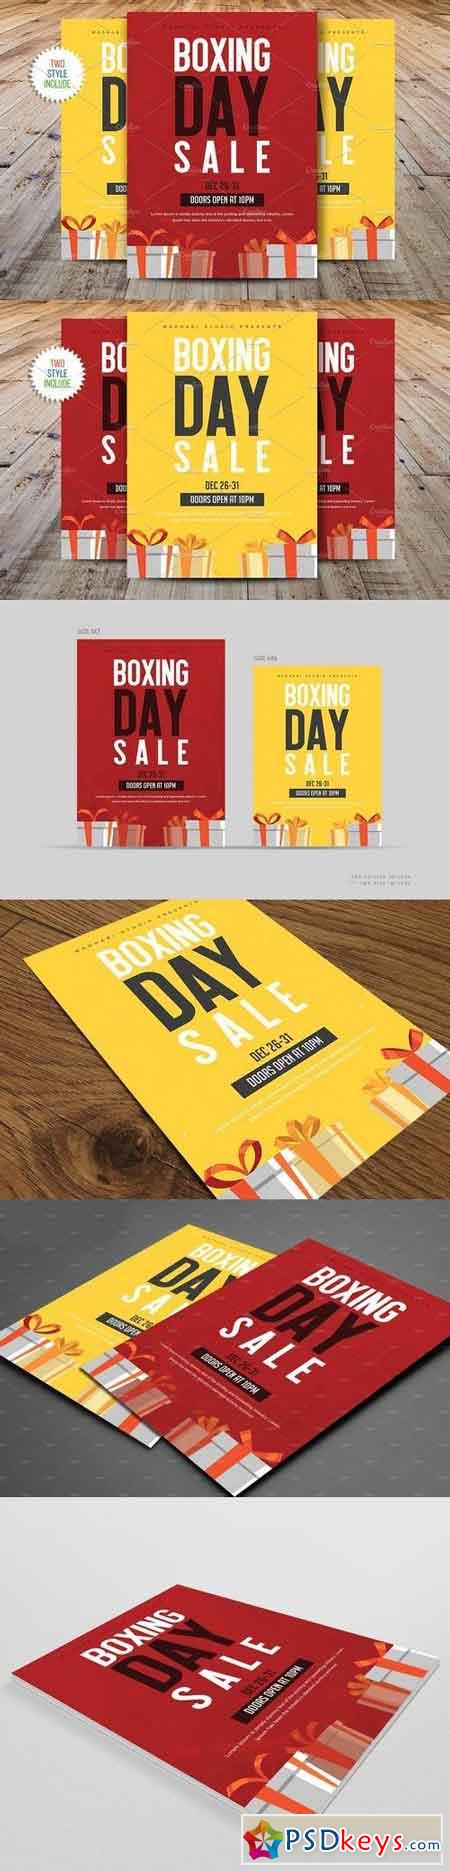 Boxing Day Sale Flyer Template 2062850